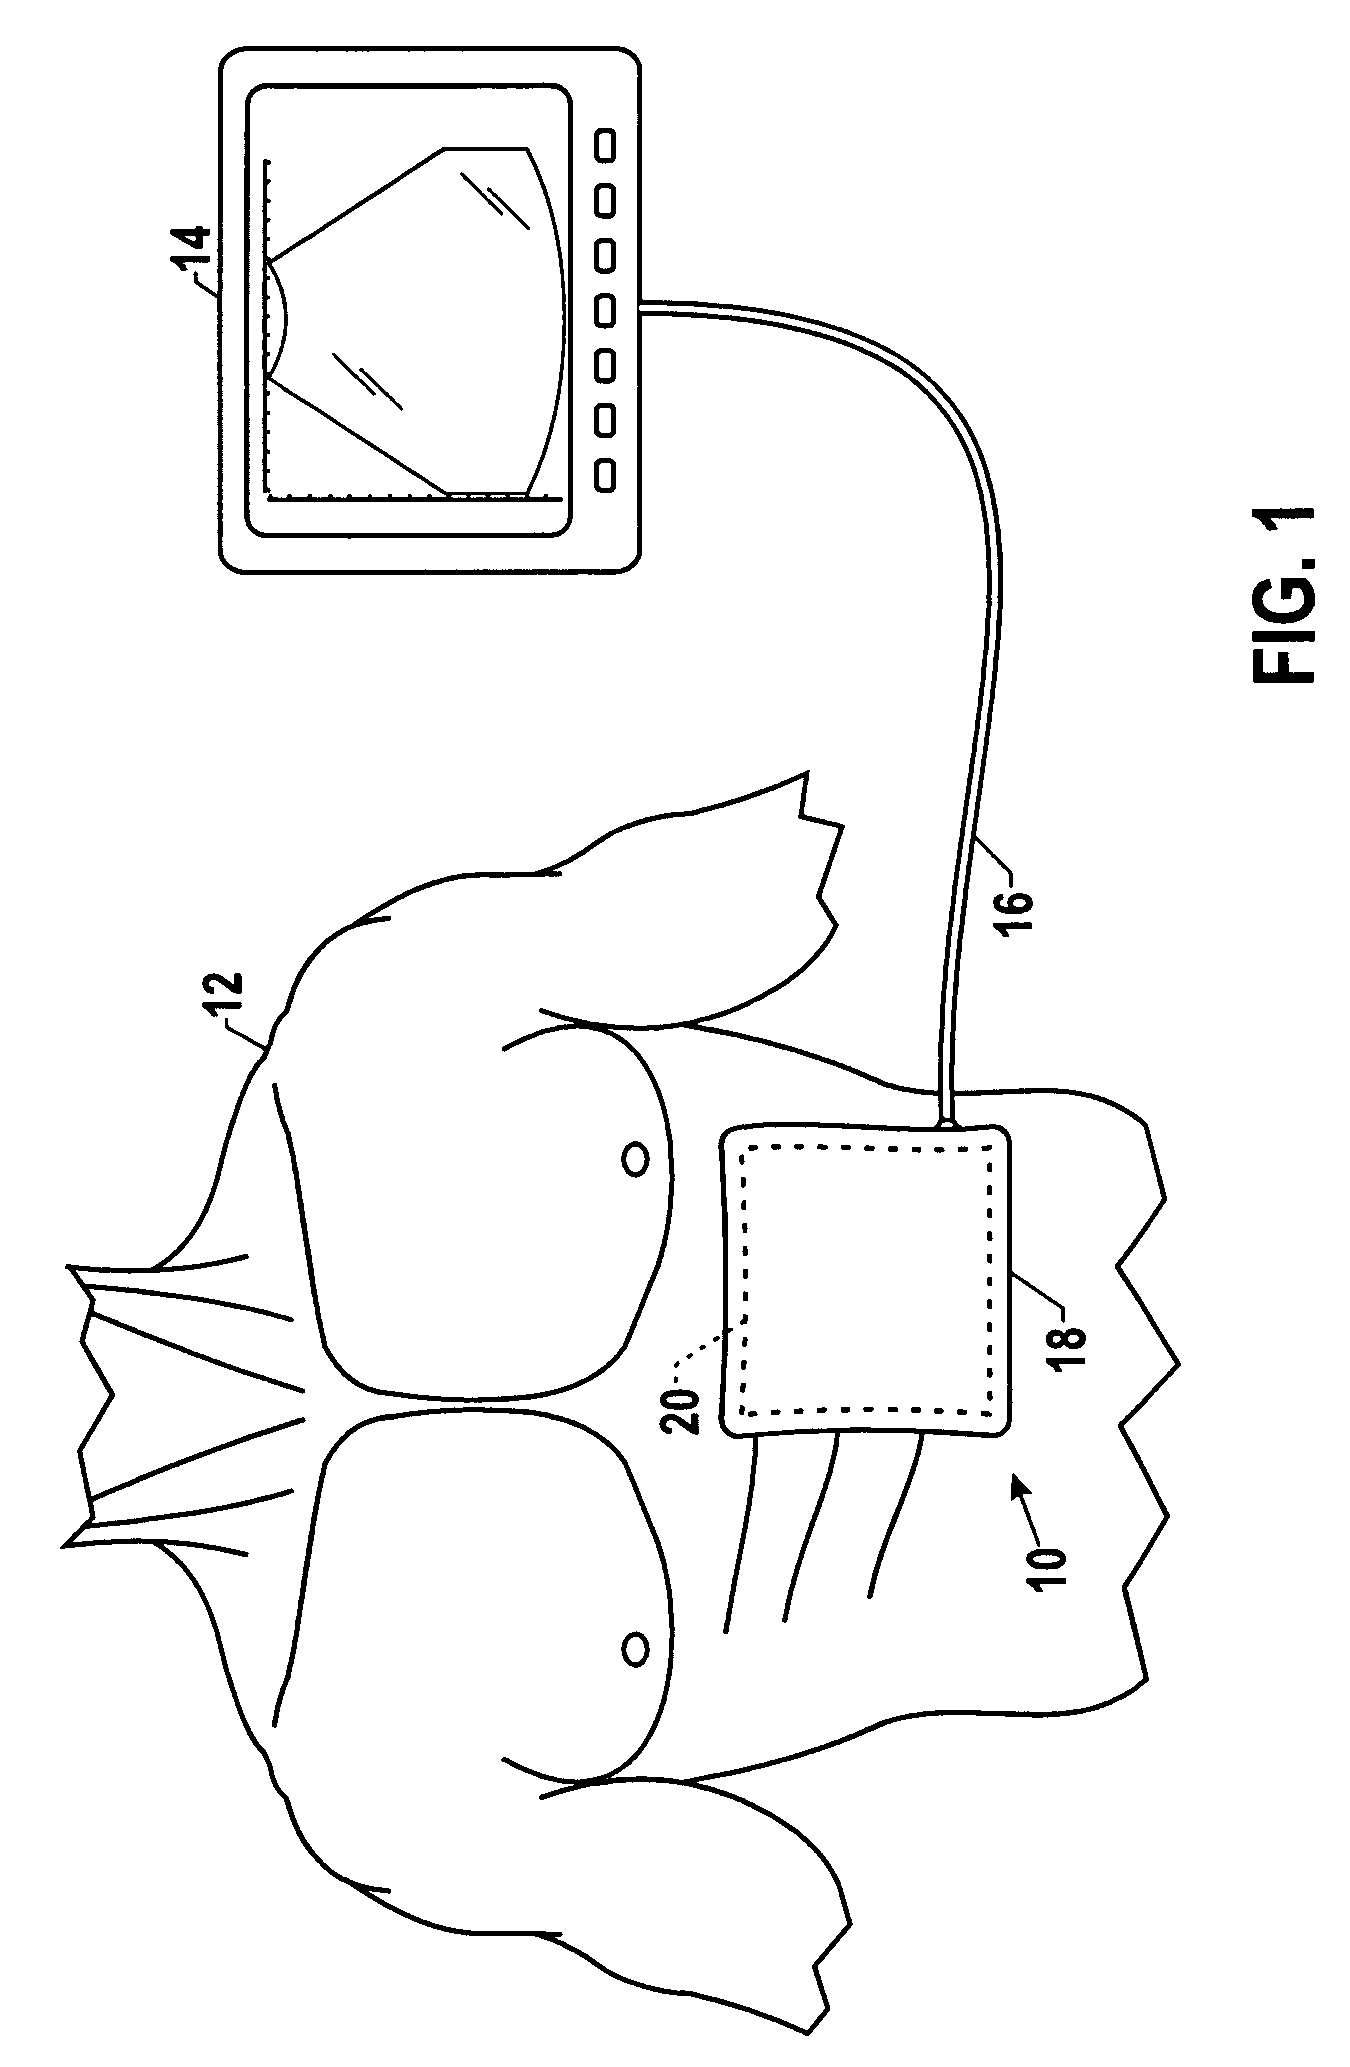 Systems and methods for operating a two-dimensional transducer array